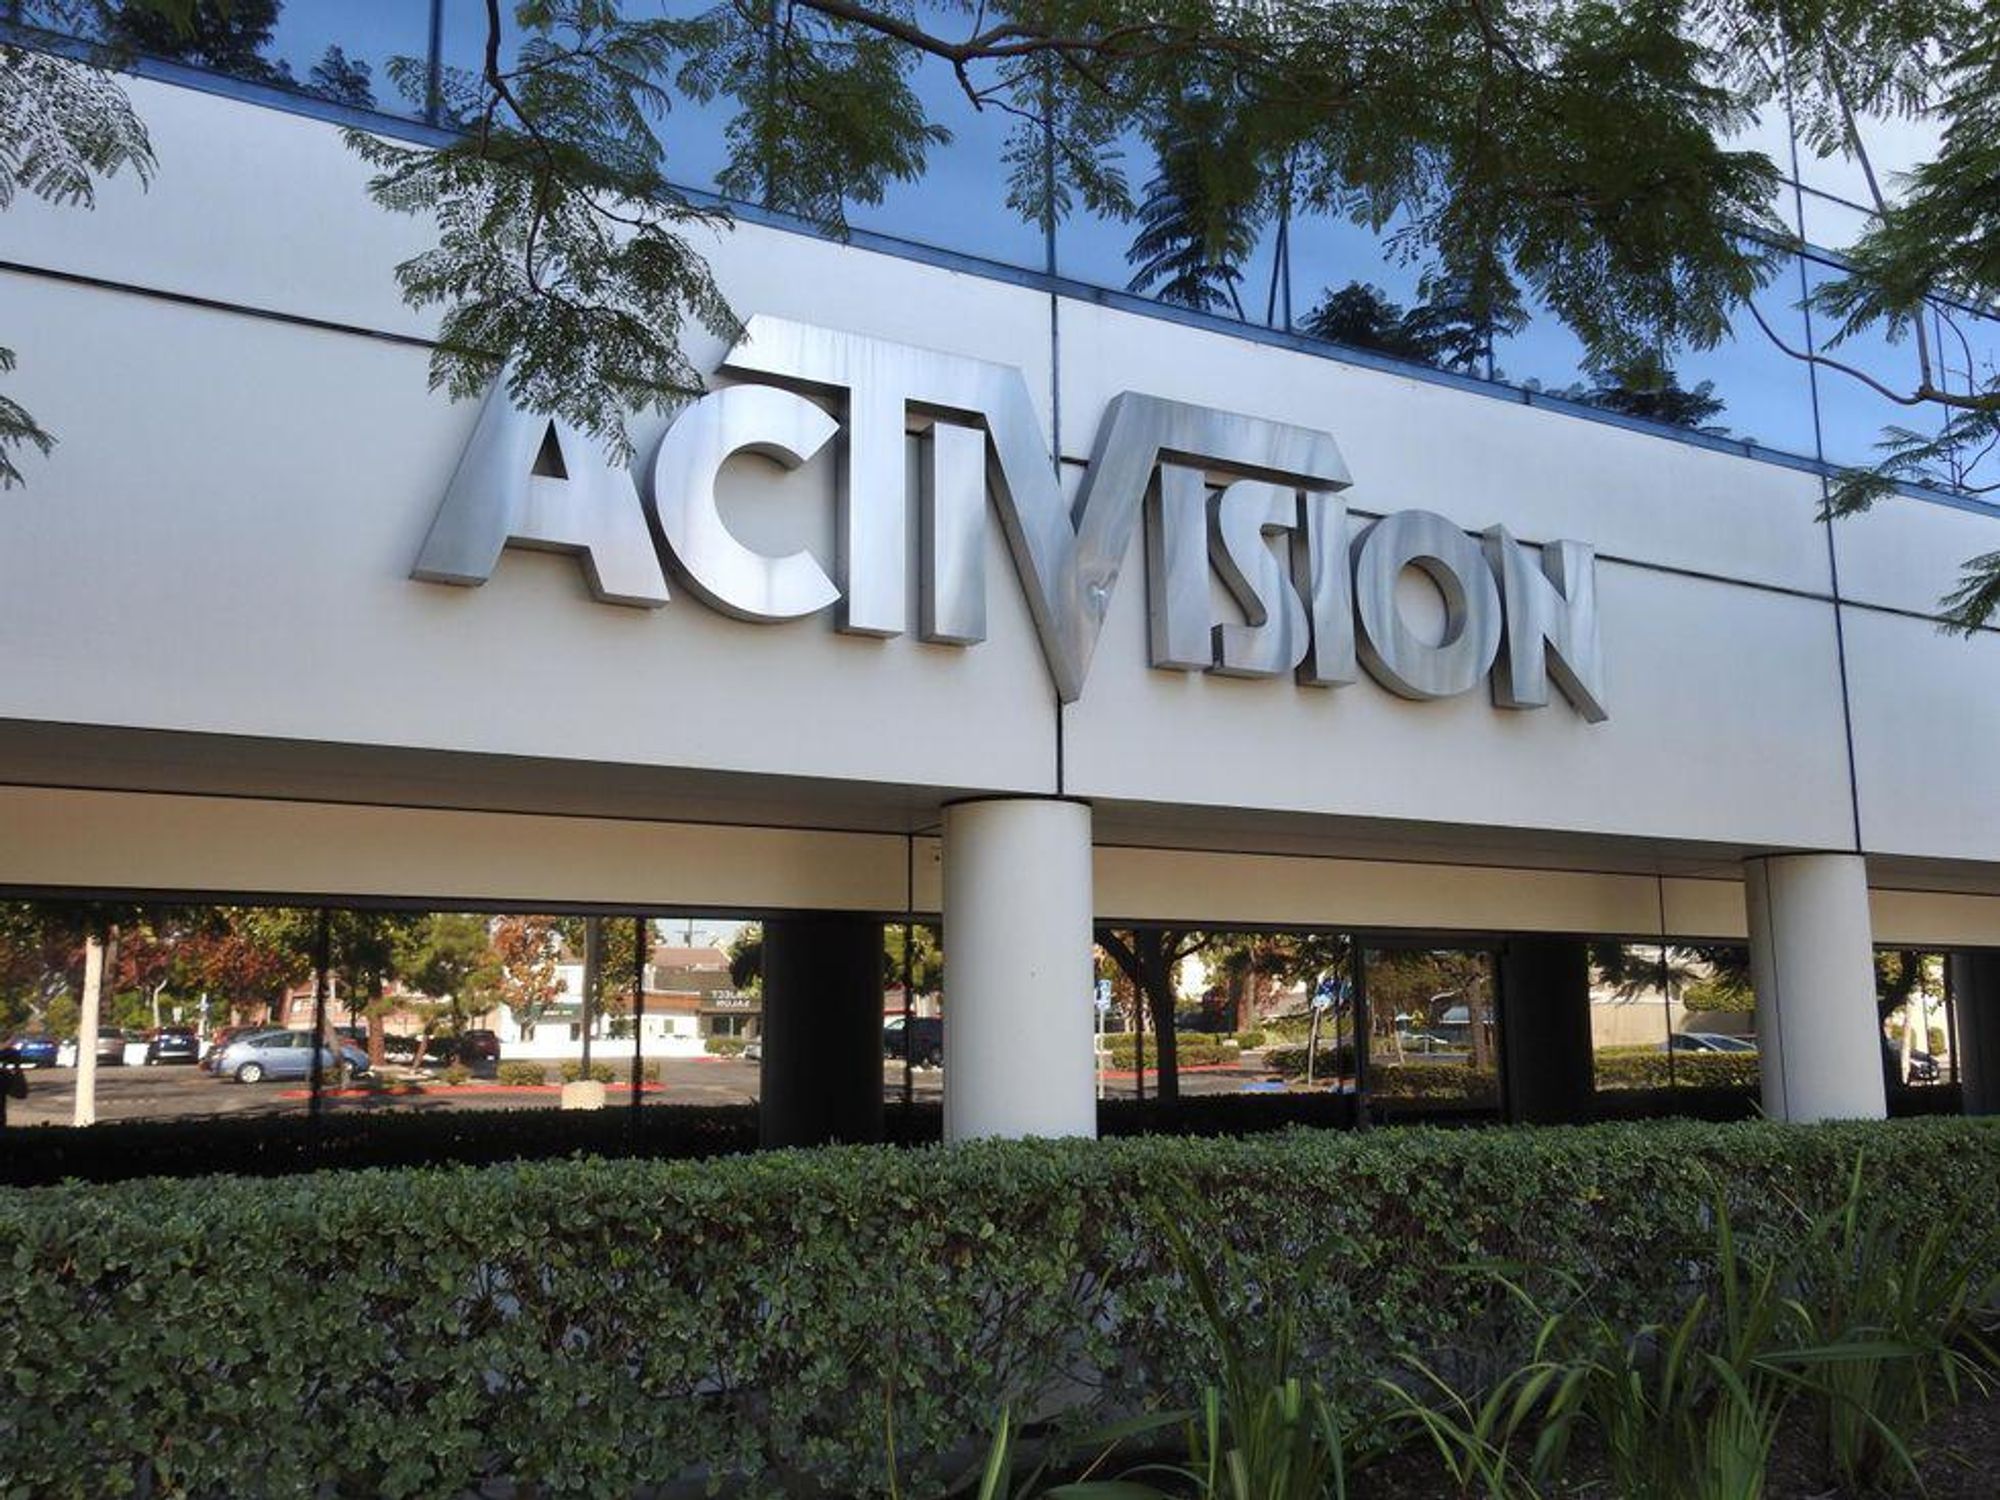 Activision Posts Lower Sales, Profits As ‘Call of Duty’ Slumps